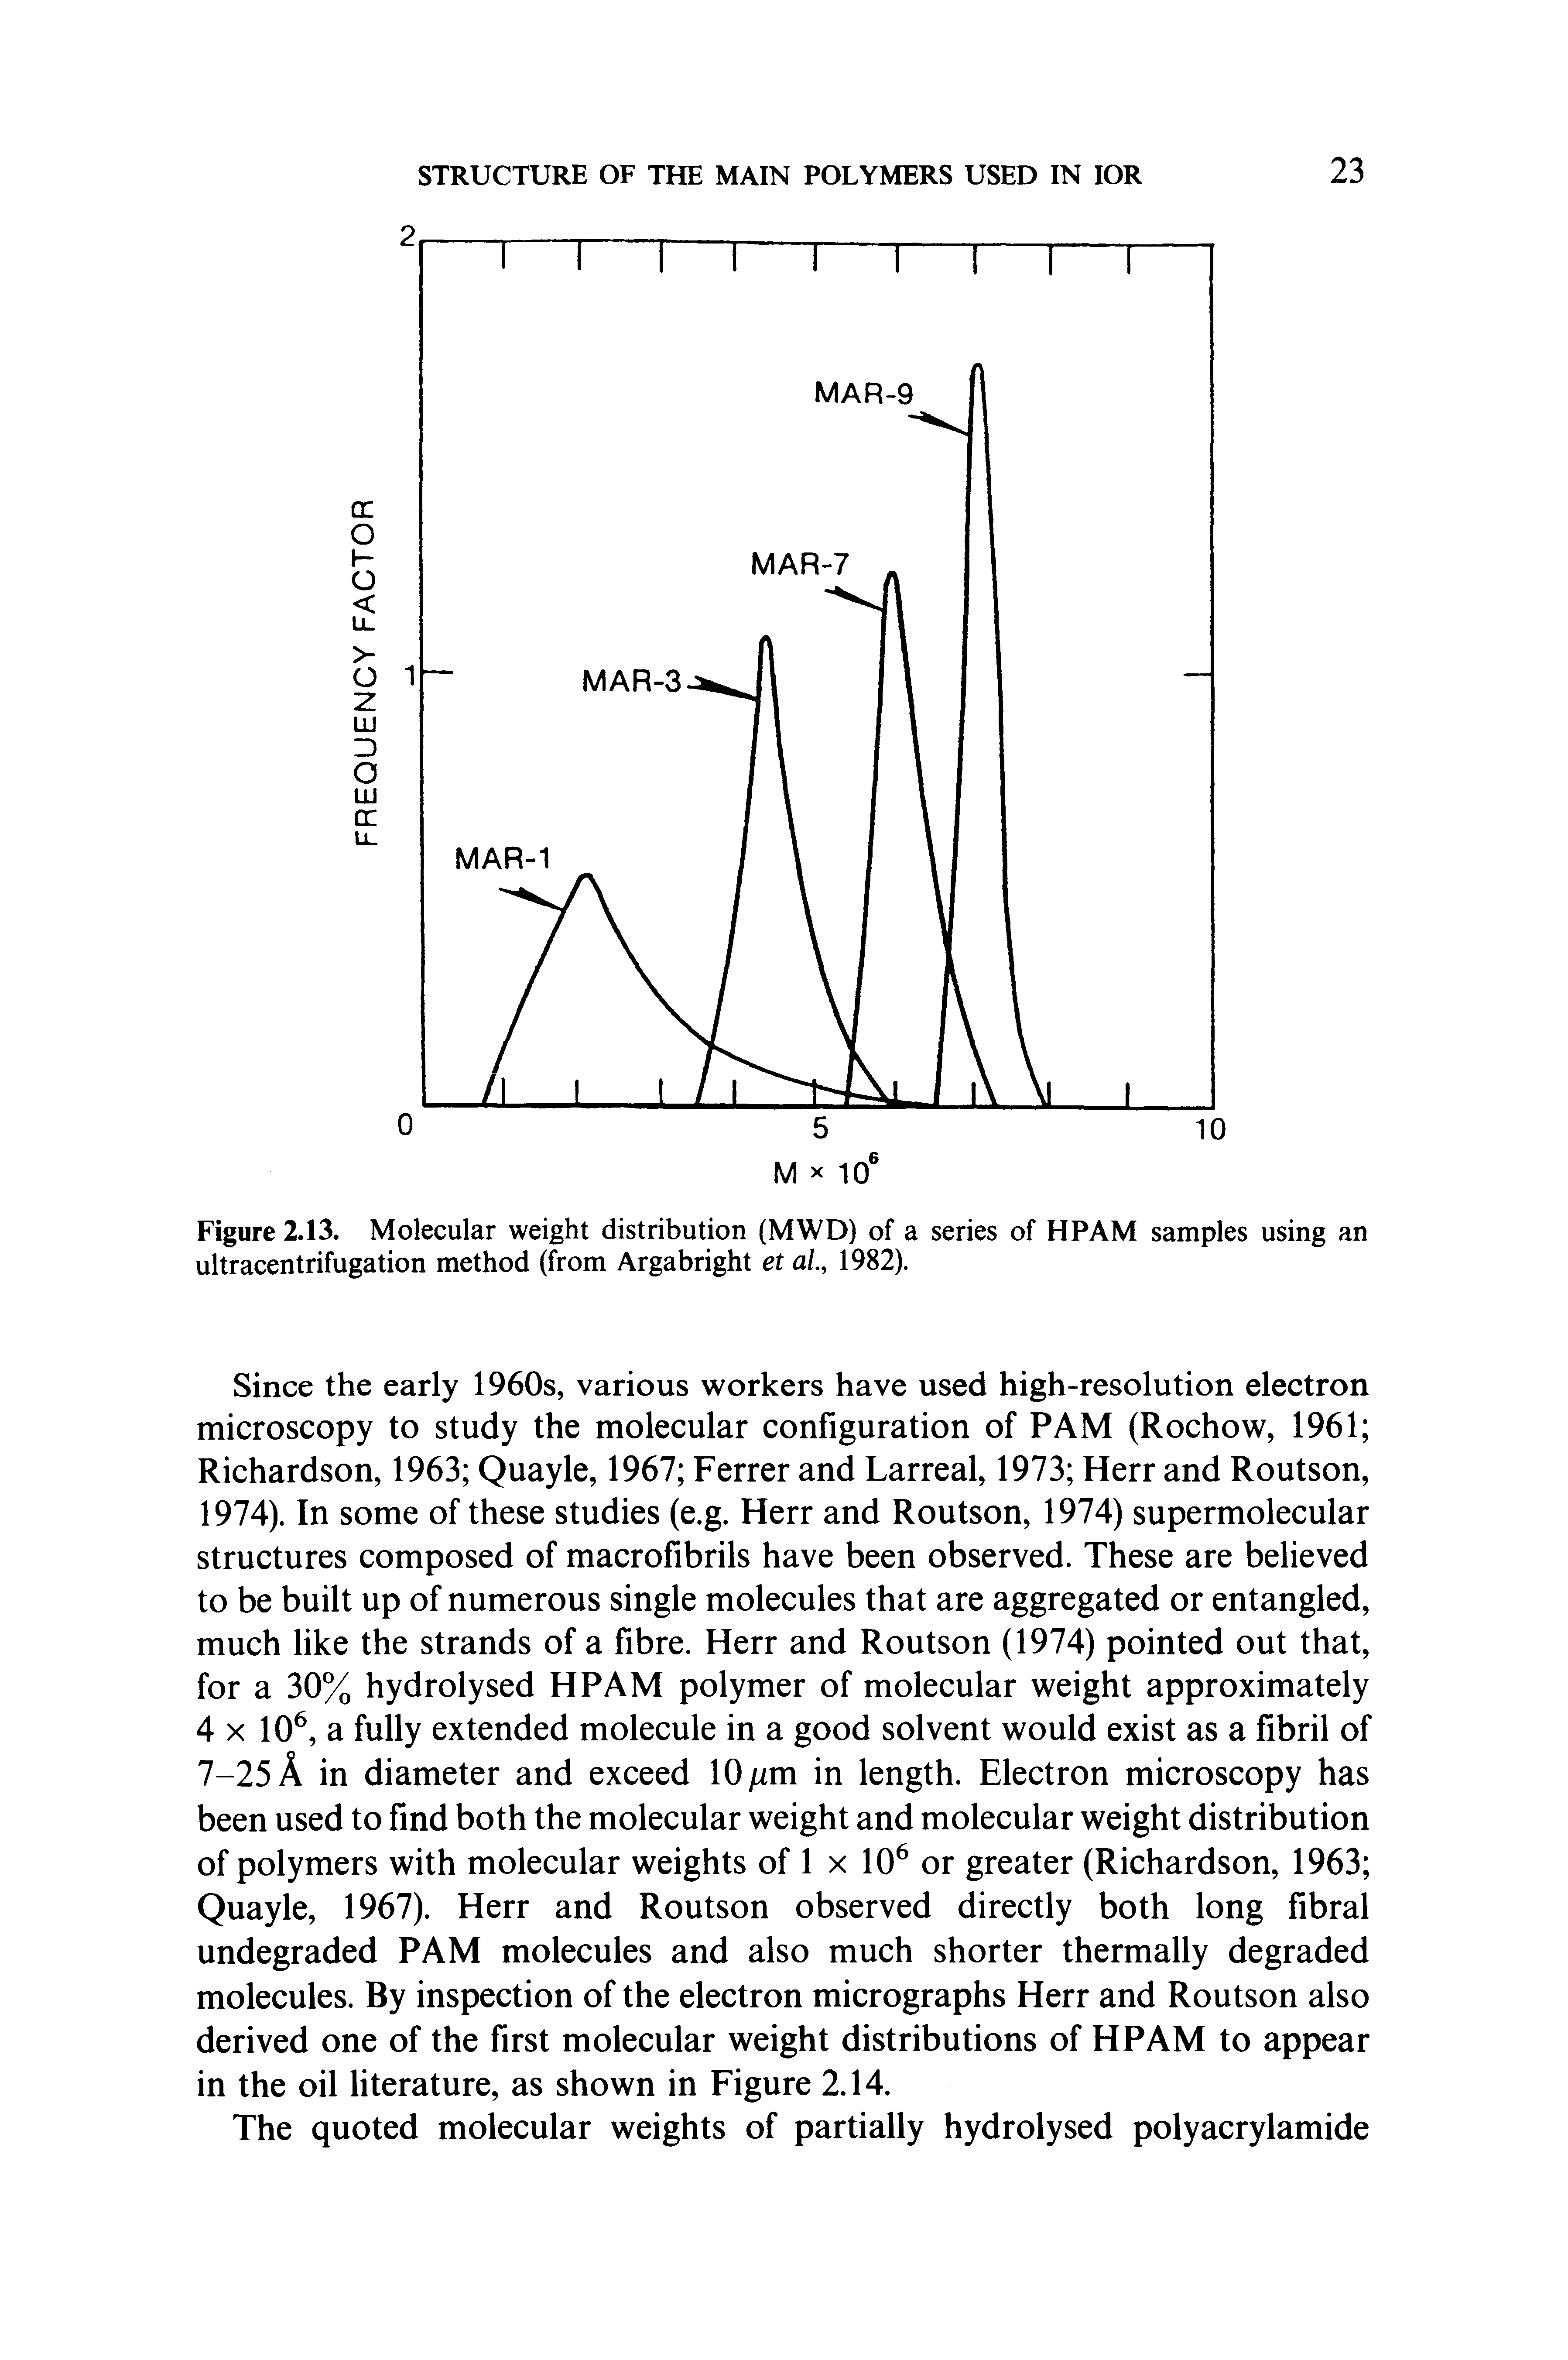 Figure 2.13. Molecular weight distribution (MWD) of a series of HPAM samples using an ultracentrifugation method (from Argabright et ai, 1982).